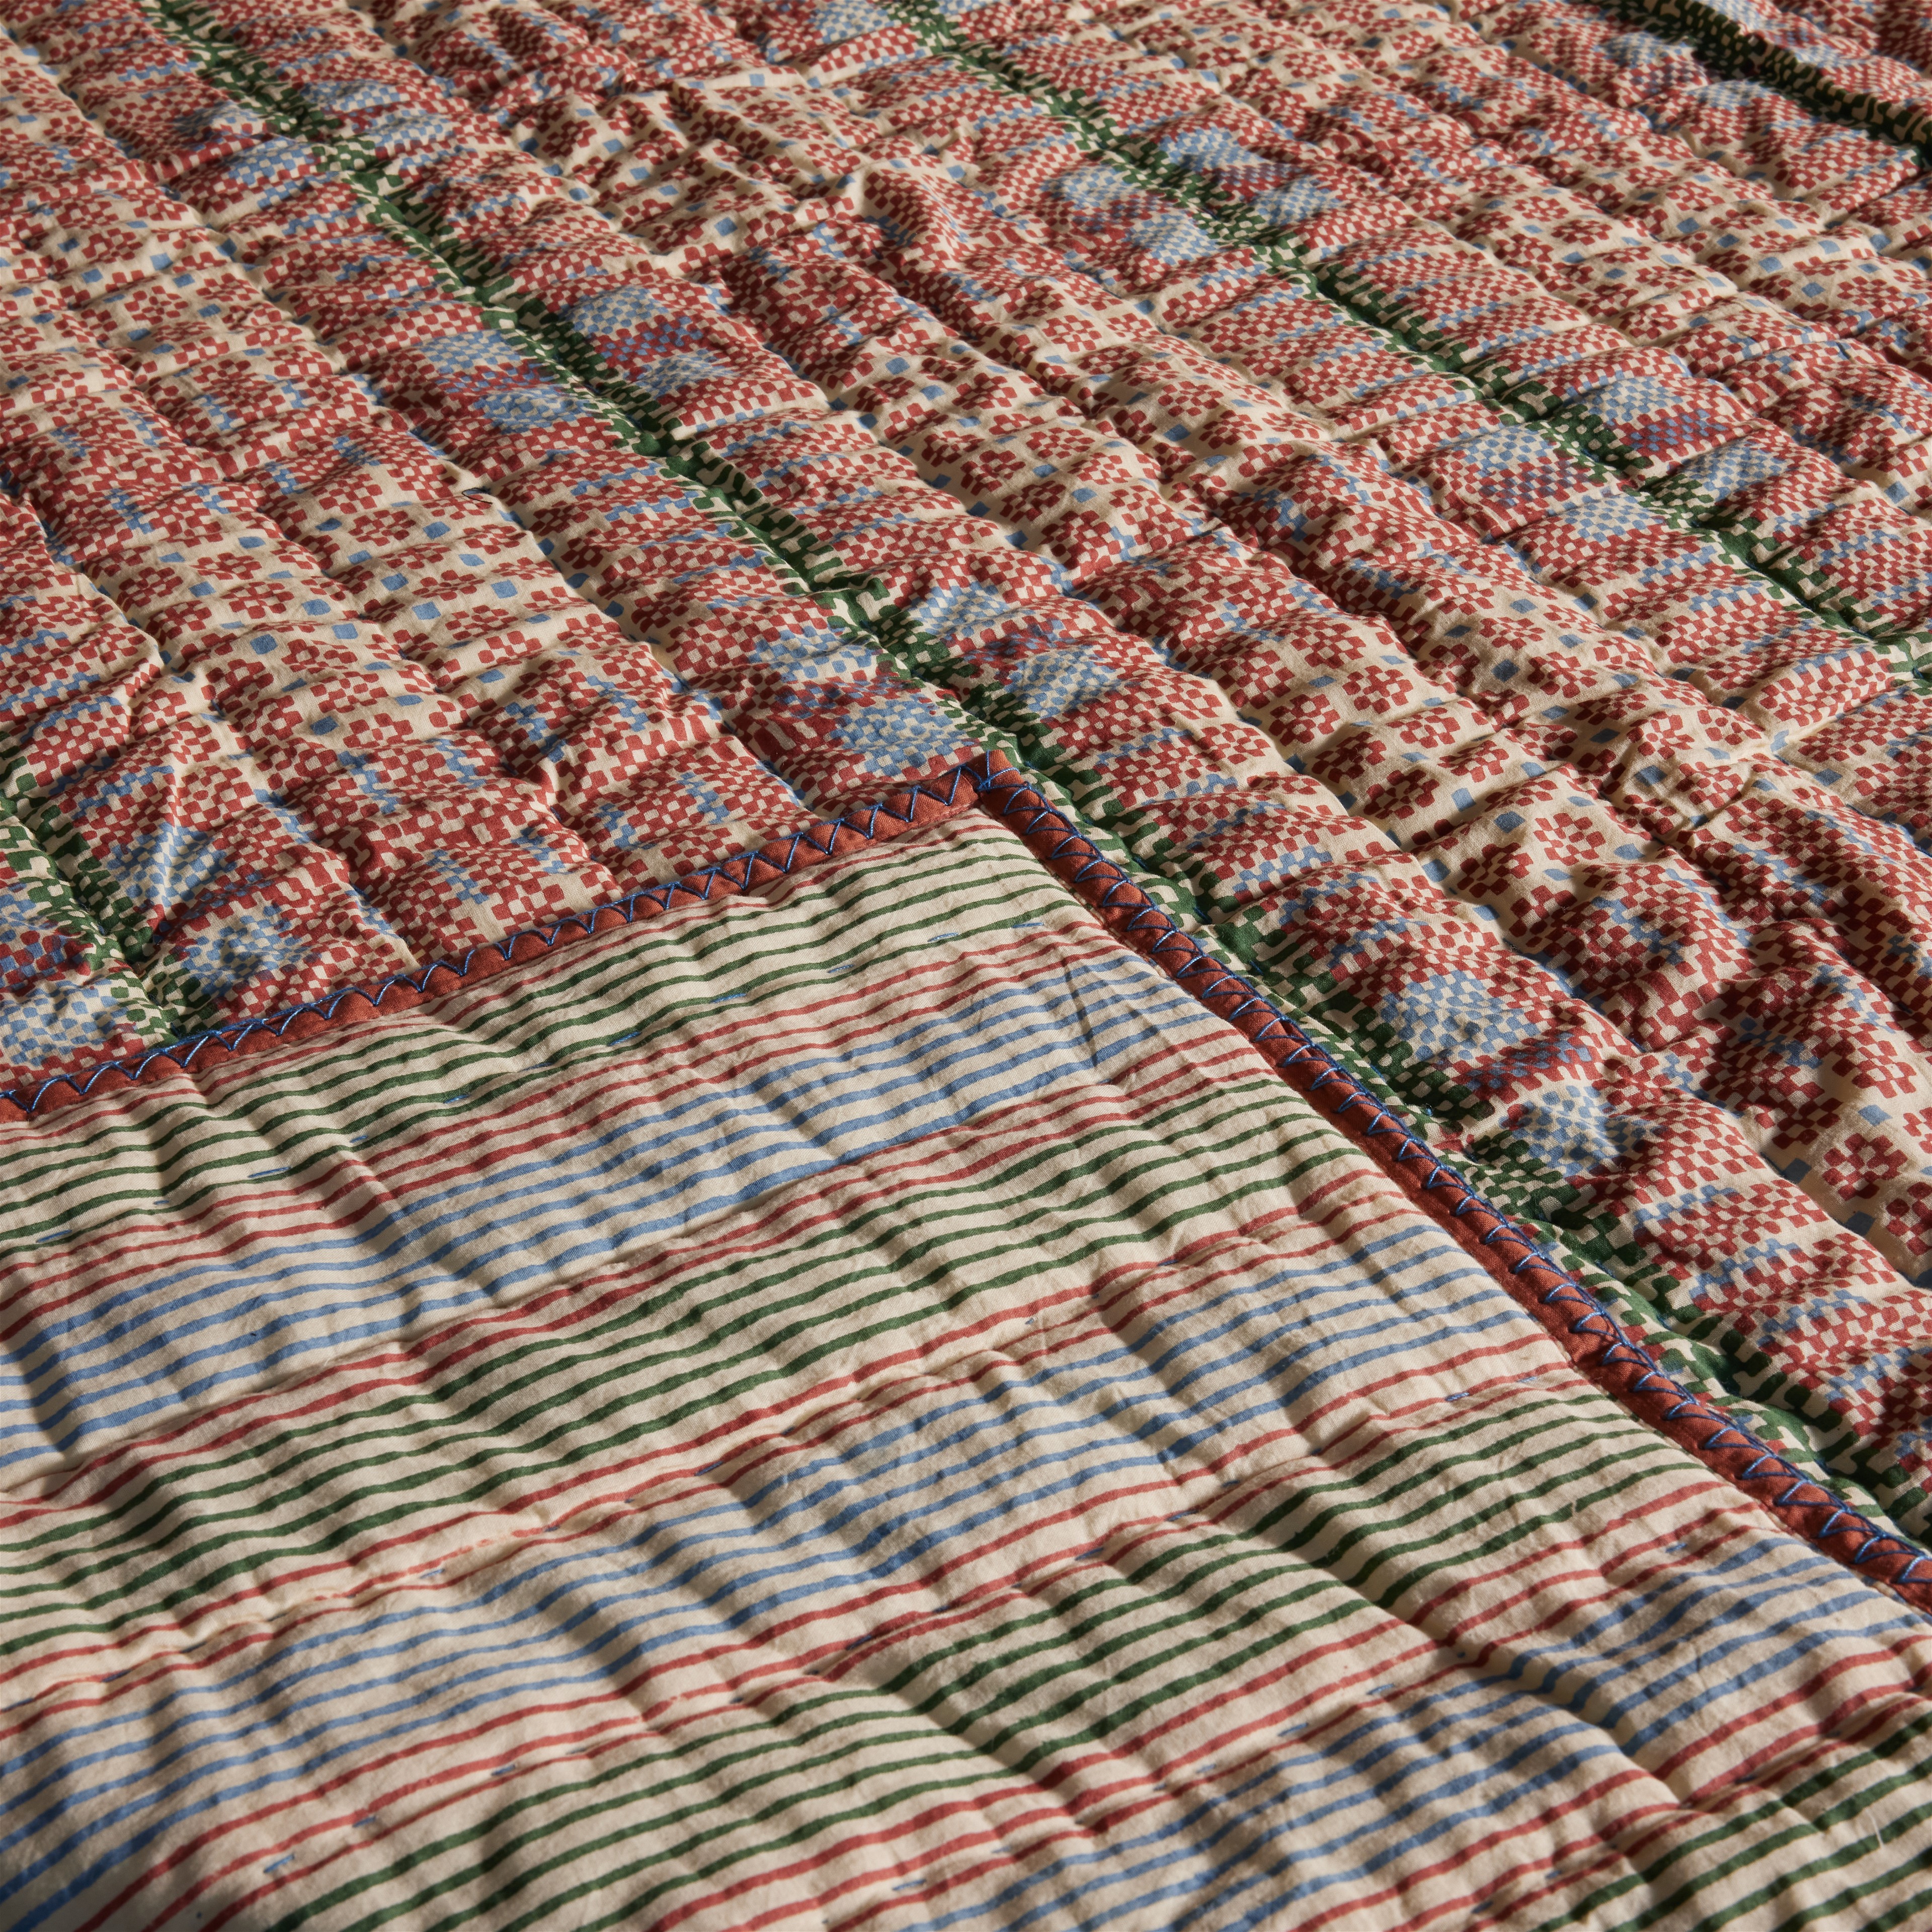 a multicolored quilt is laying on a bed